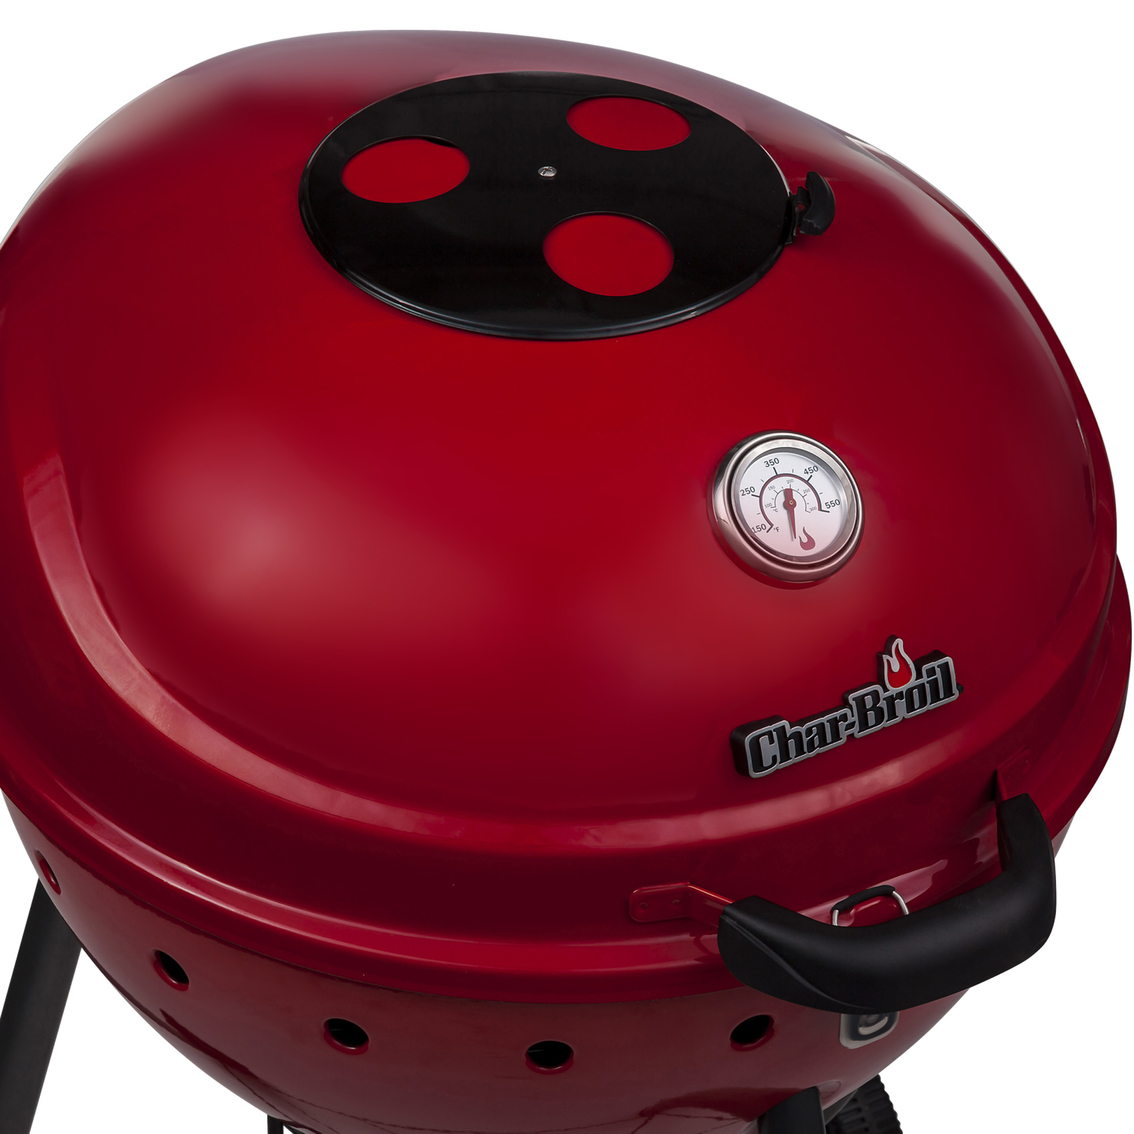 Char-Broil Red Kettleman Charcoal Grill - Image 5 of 5